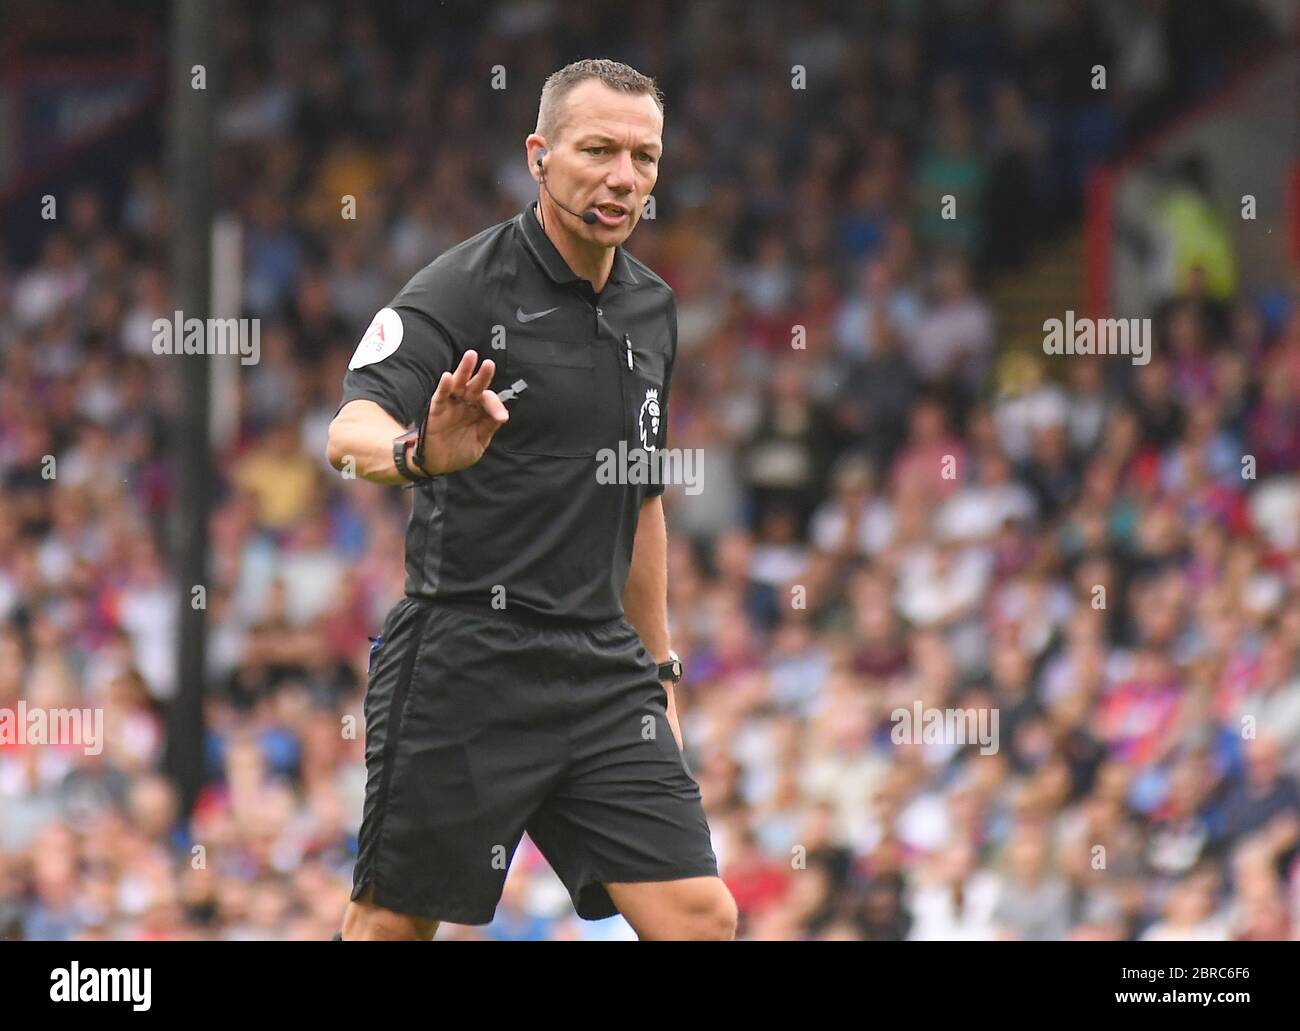 LONDON, ENGLAND - AUGUST 31, 2019: English referee Kevin Friend pictured during the 2019/20 Premier League game between Crystal Palace FC and Aston Villa FC at Selhurst Park. Stock Photo